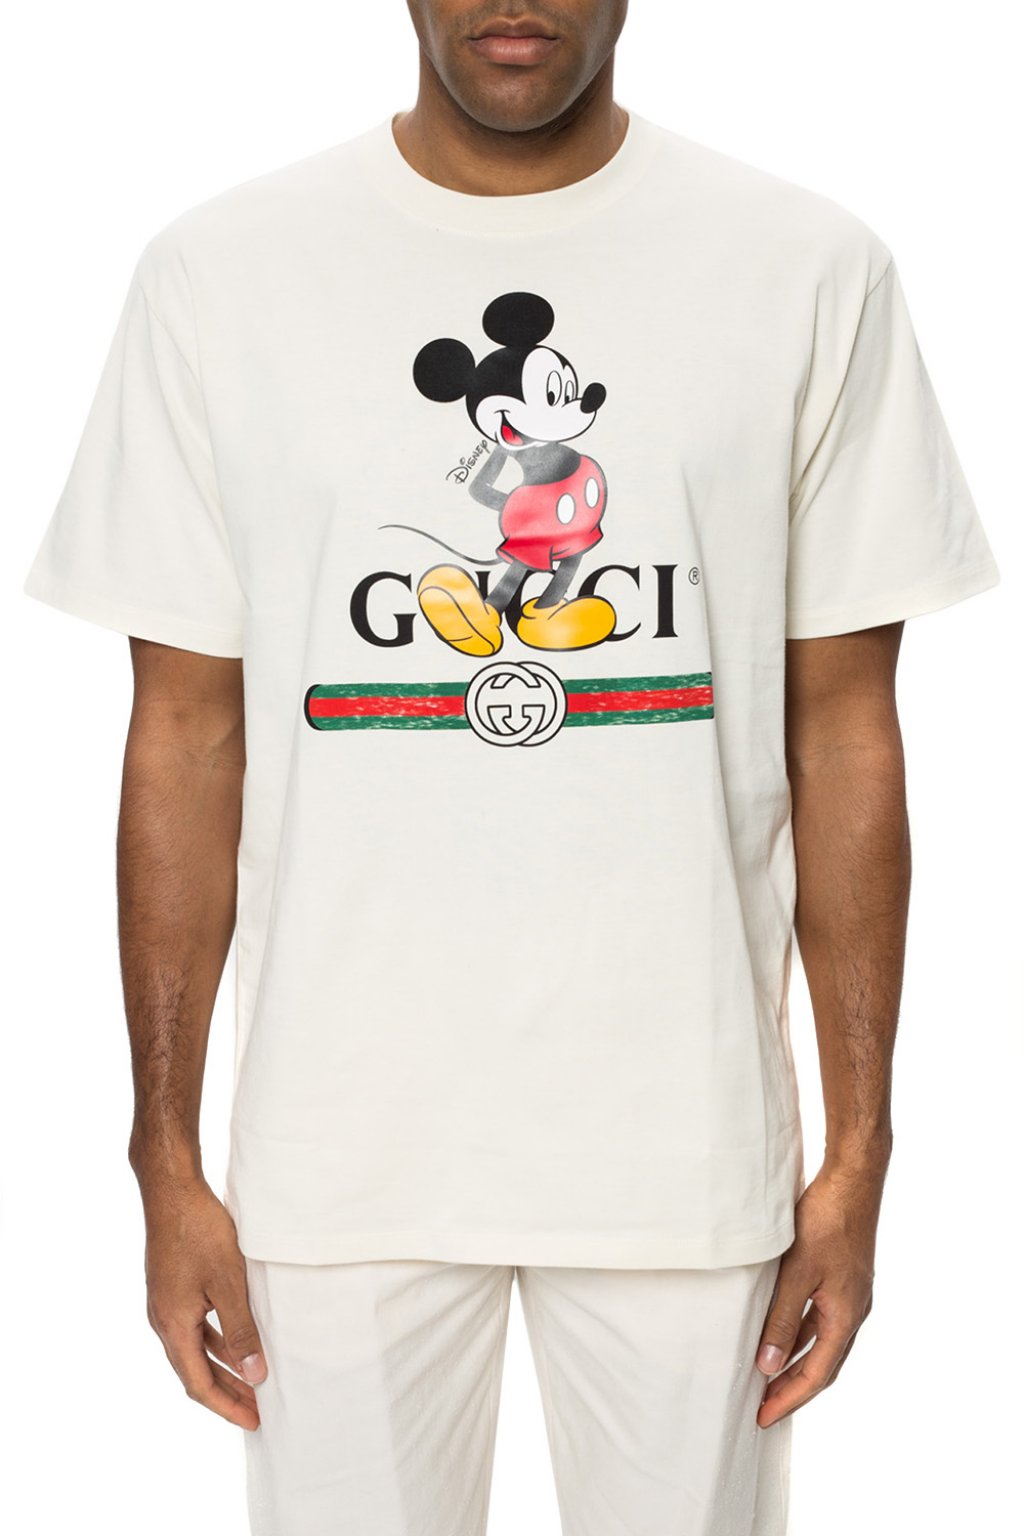 Gucci Disney X Swimsuit in White